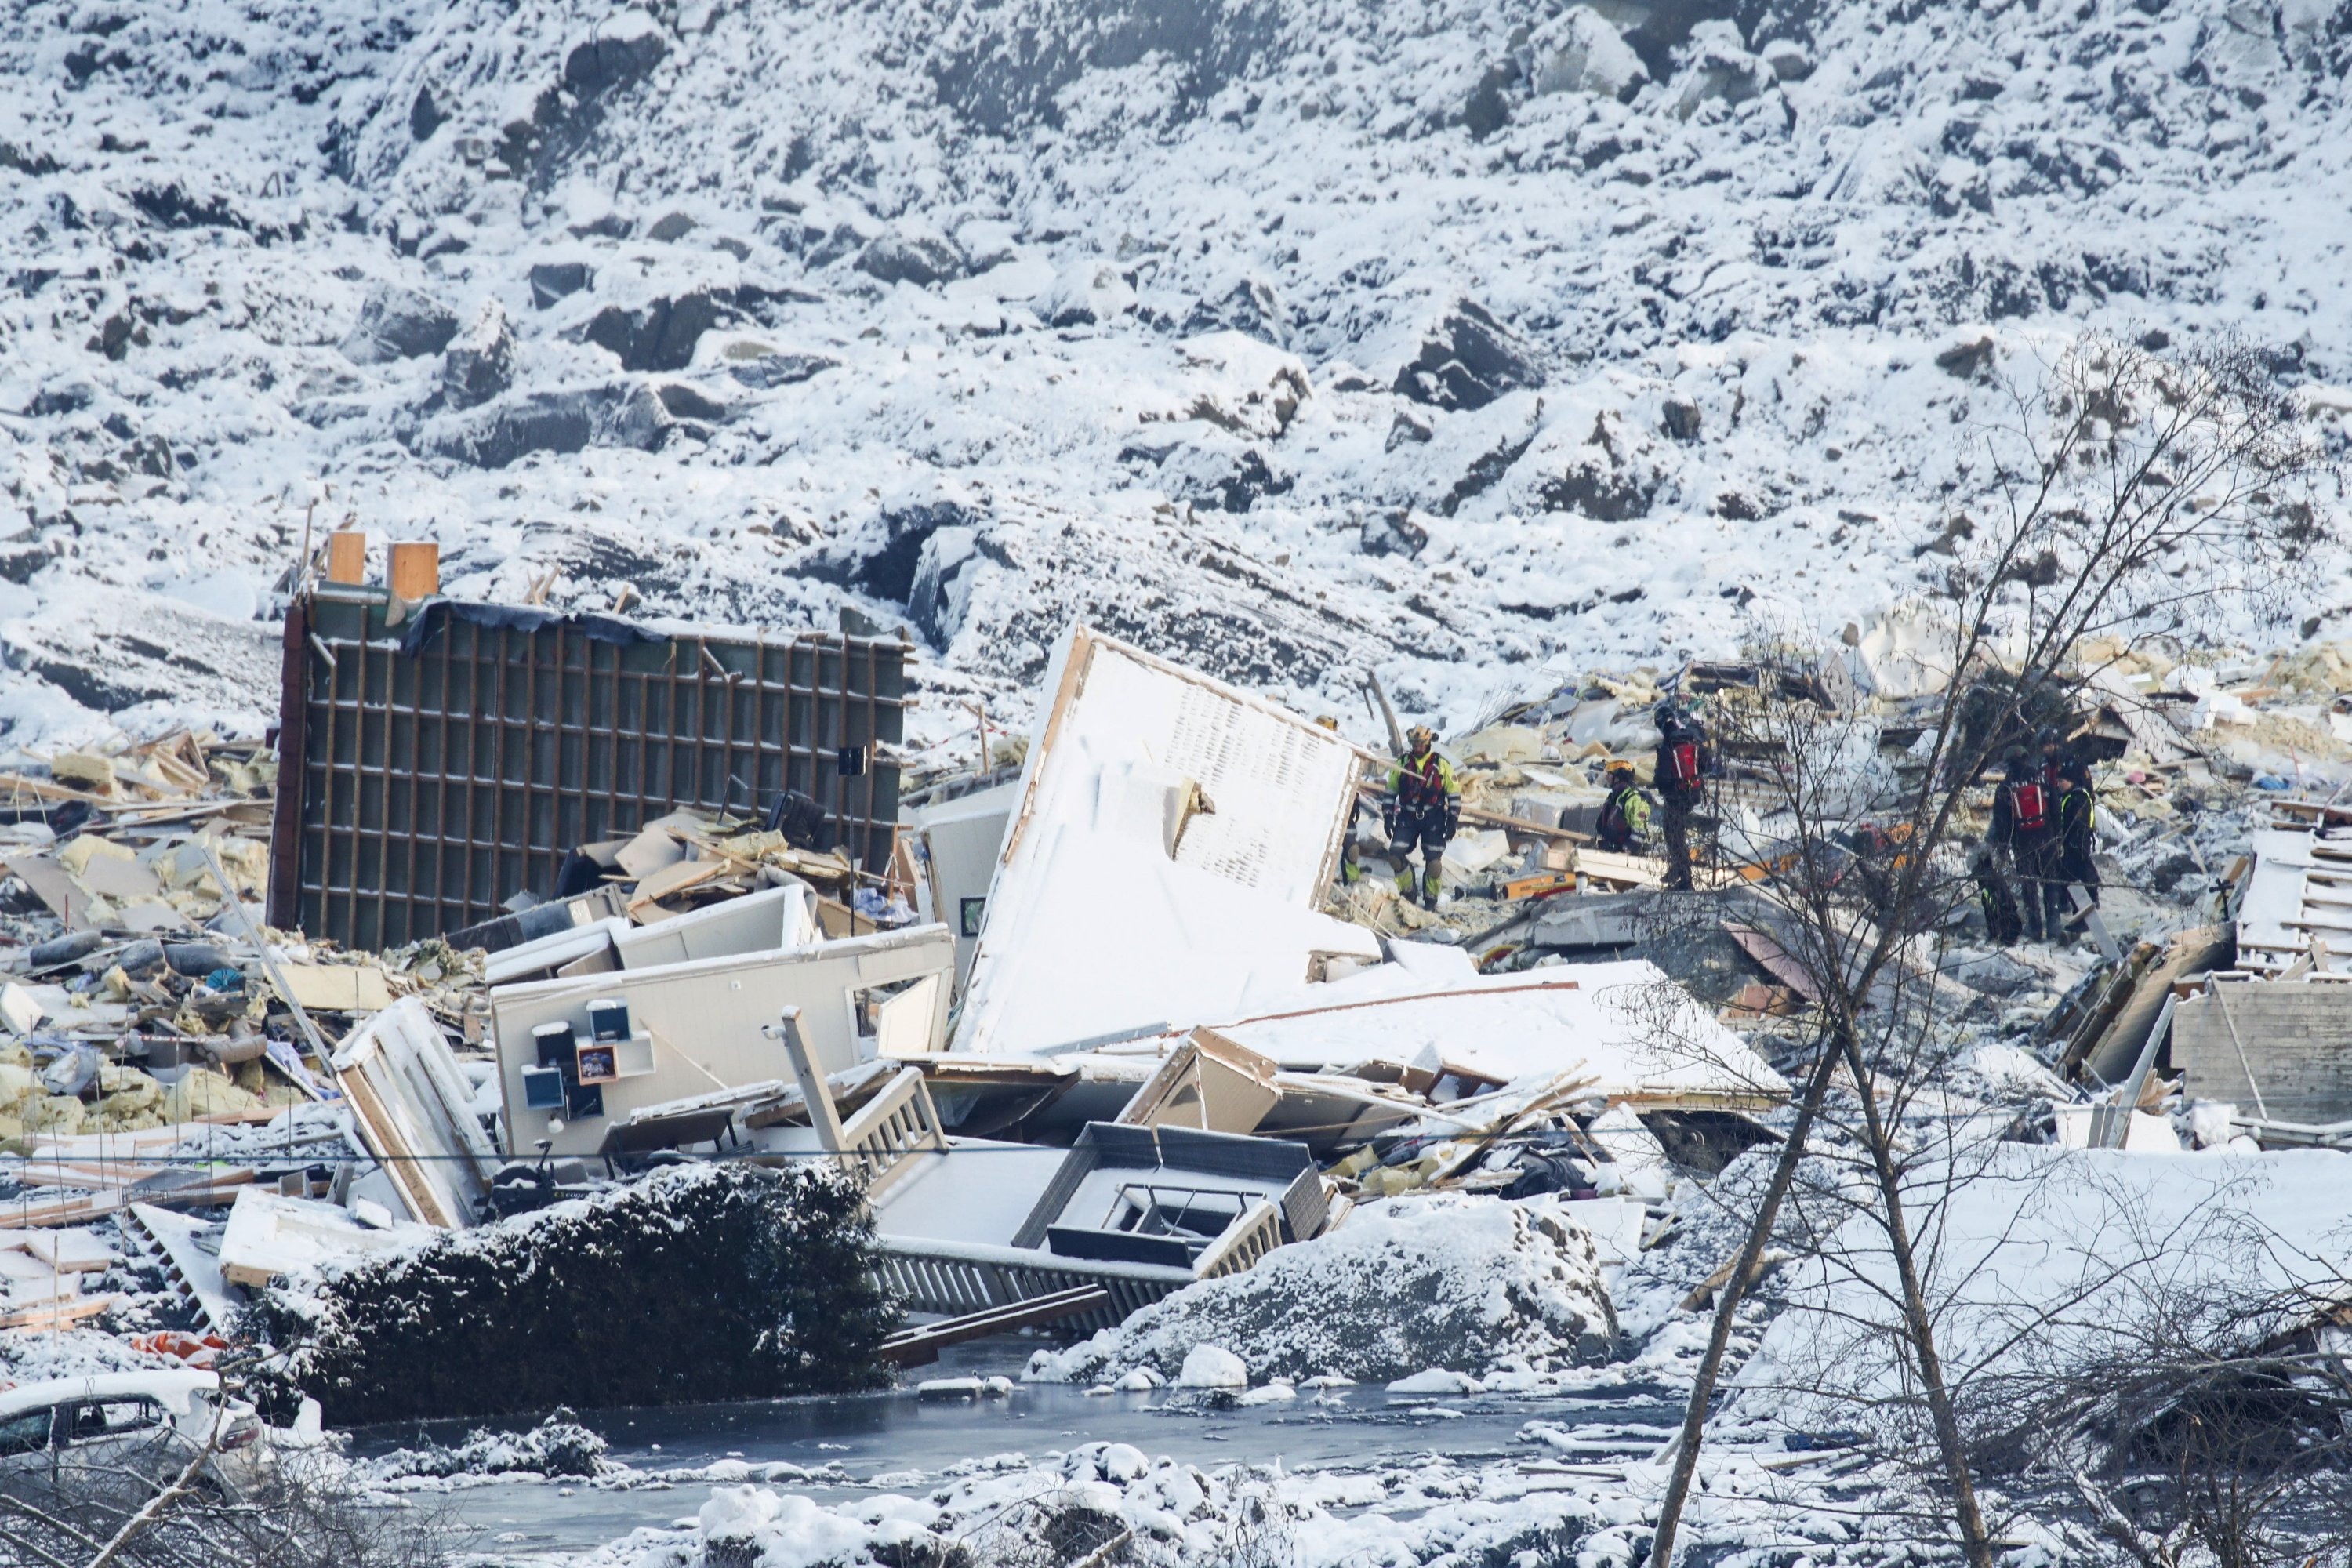 Rescuers in Norway lose hope of finding survivors